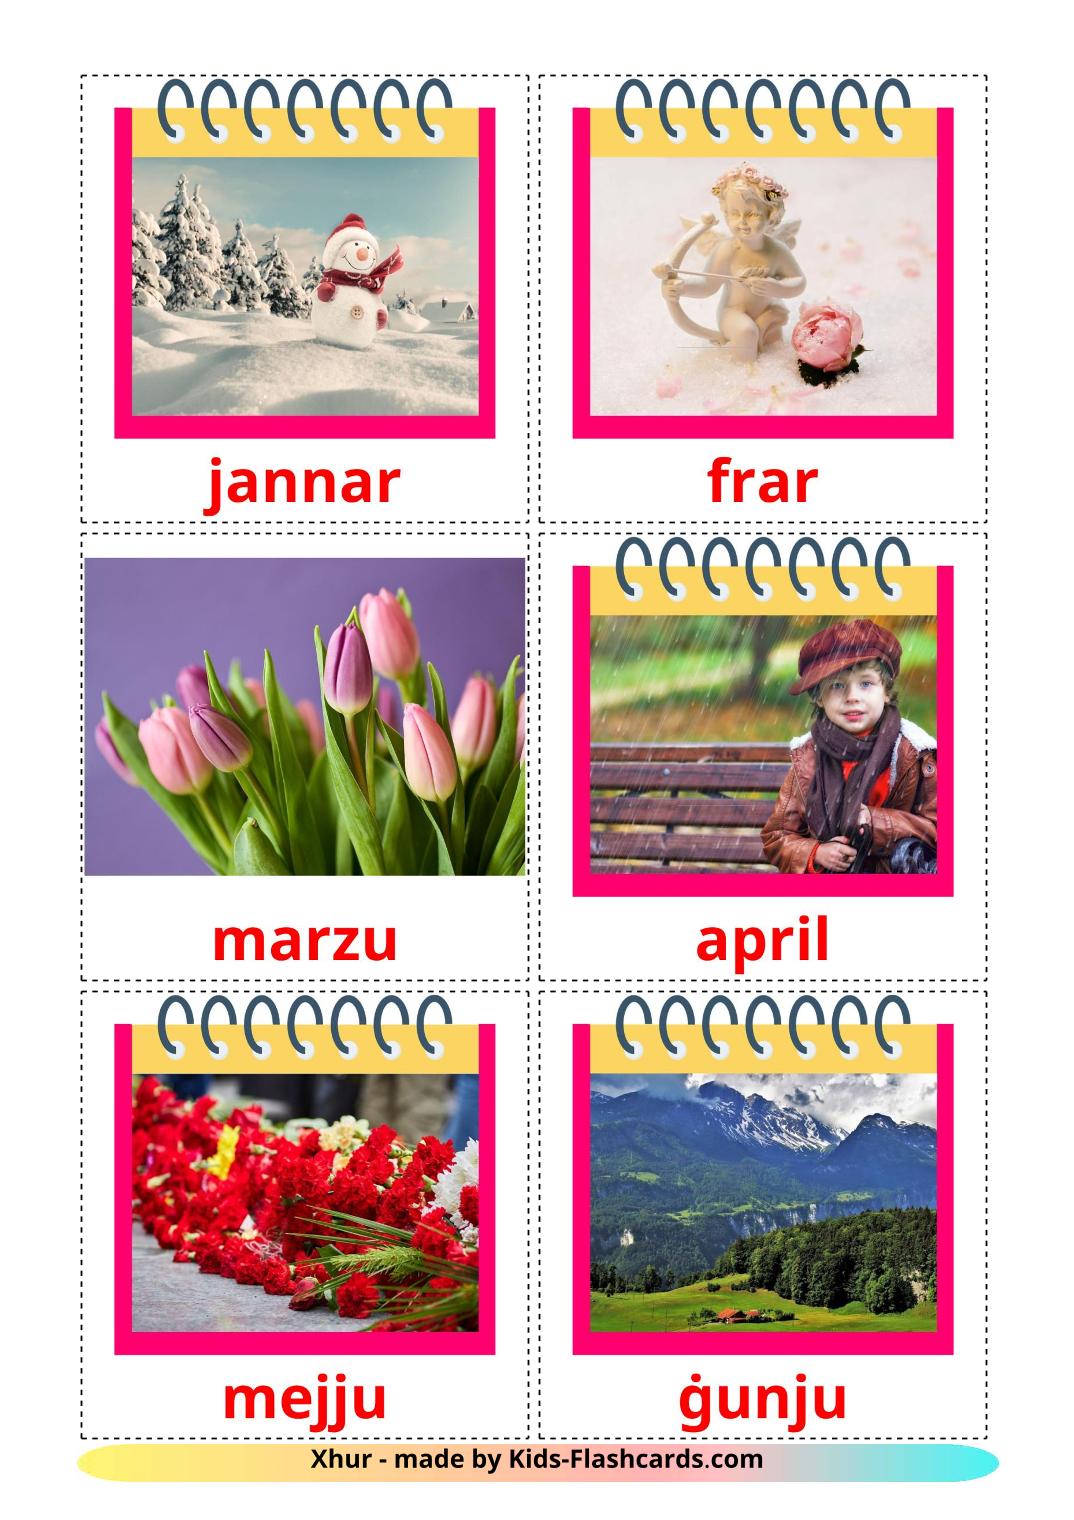 Months of the Year - 12 Free Printable maltese Flashcards 